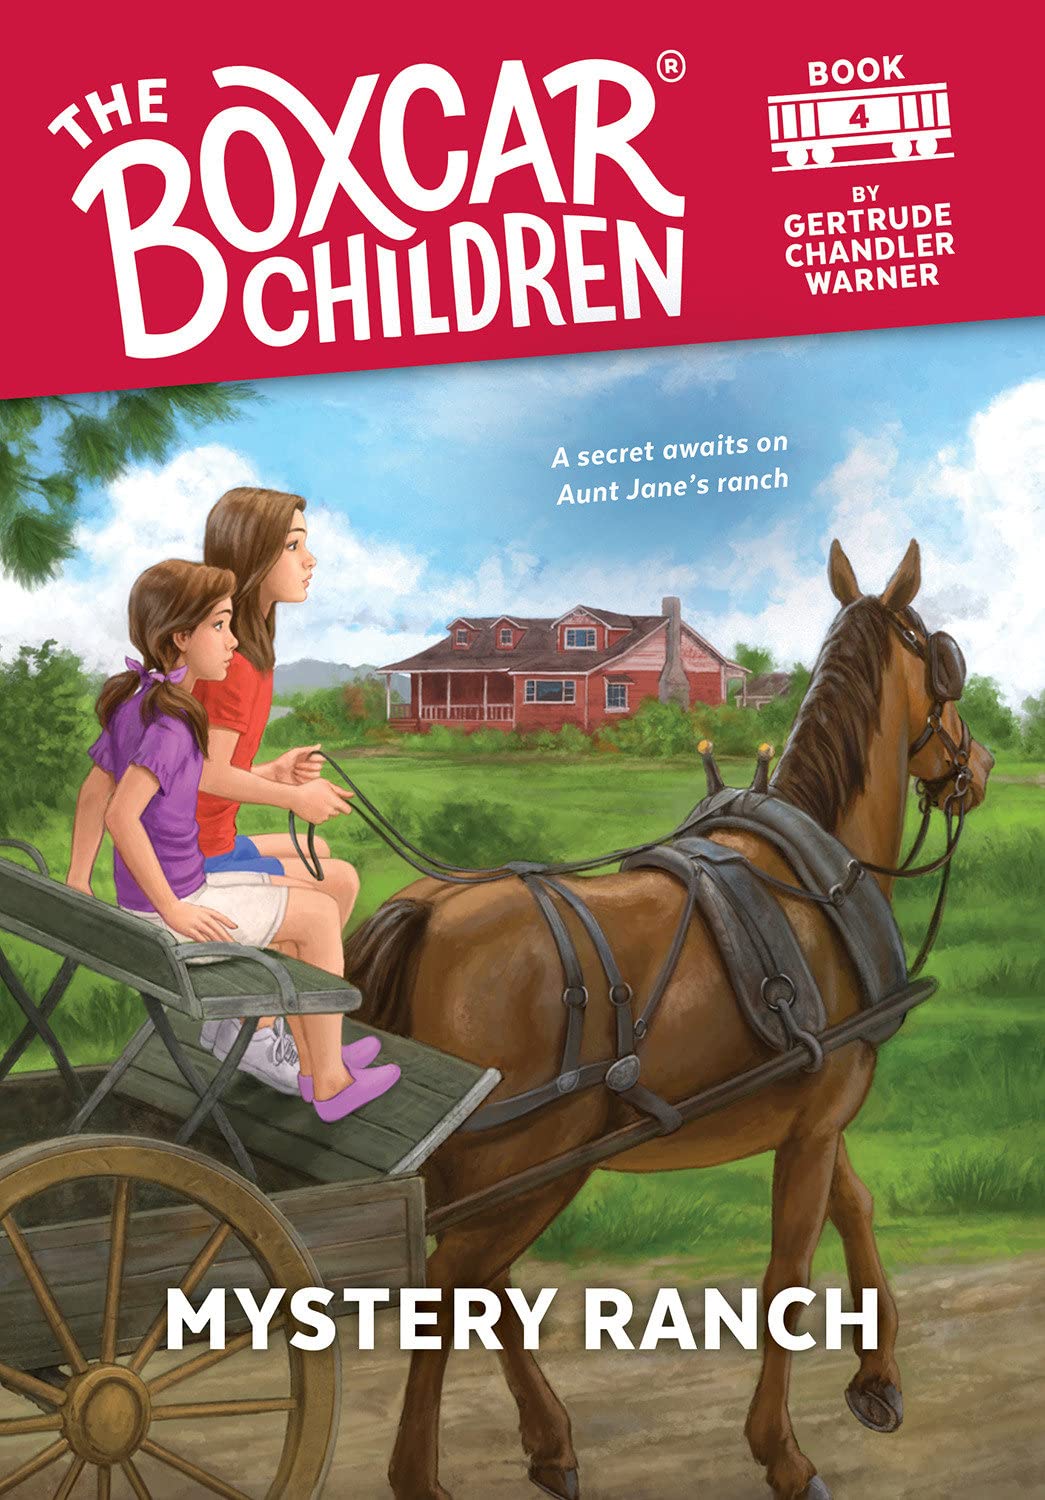 The Boxcar Children #4 Mystery Ranch - Paperback